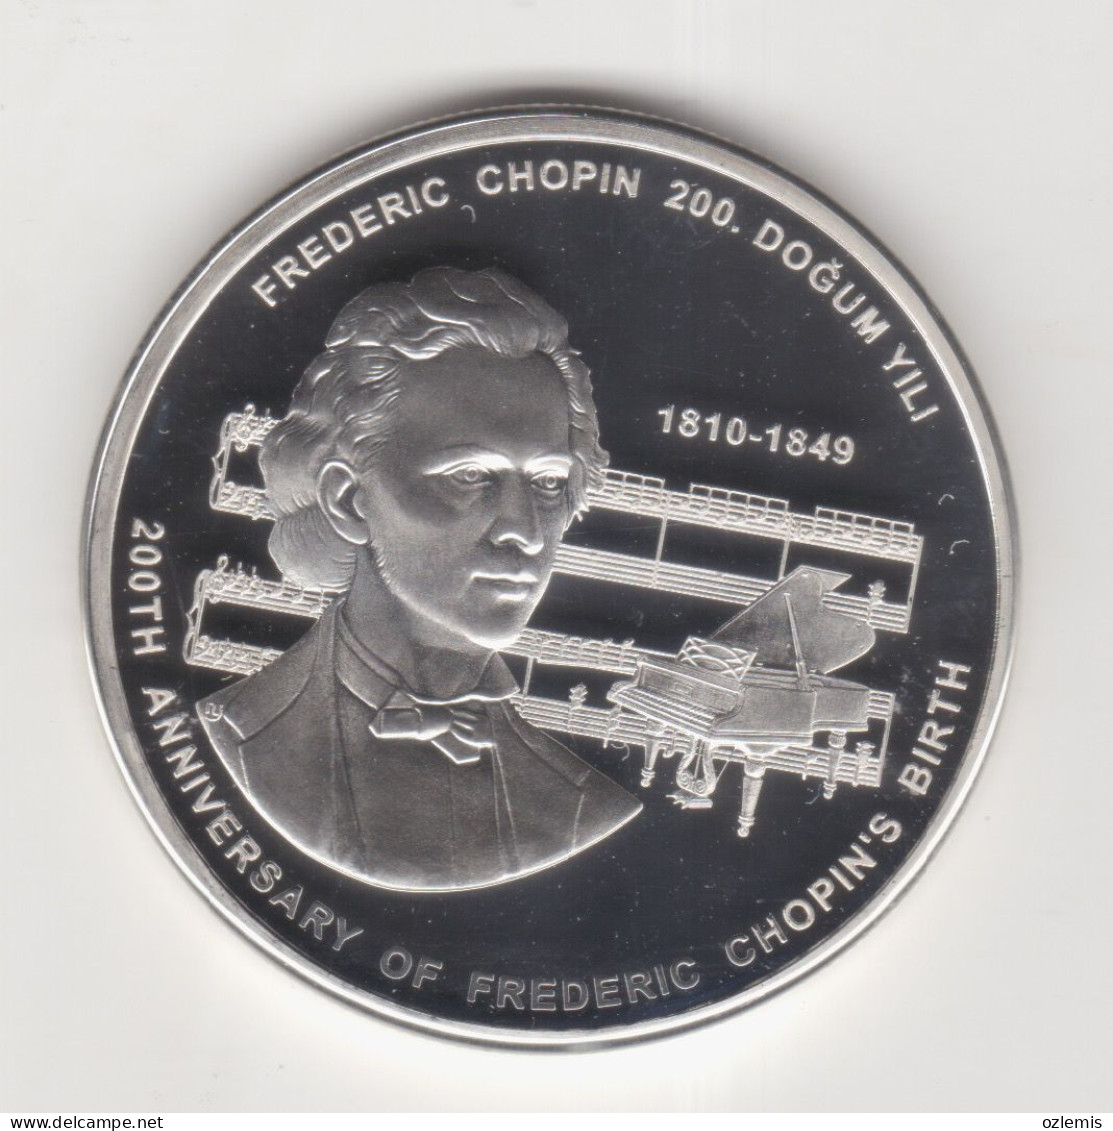 200 TH ,BIRTH YEAR OF ,FREDERIC CHOPIN ,COMMEMORATIVE ,SILVER ,COIN ,TURKEY,2009, PROFF UNC - Turquie